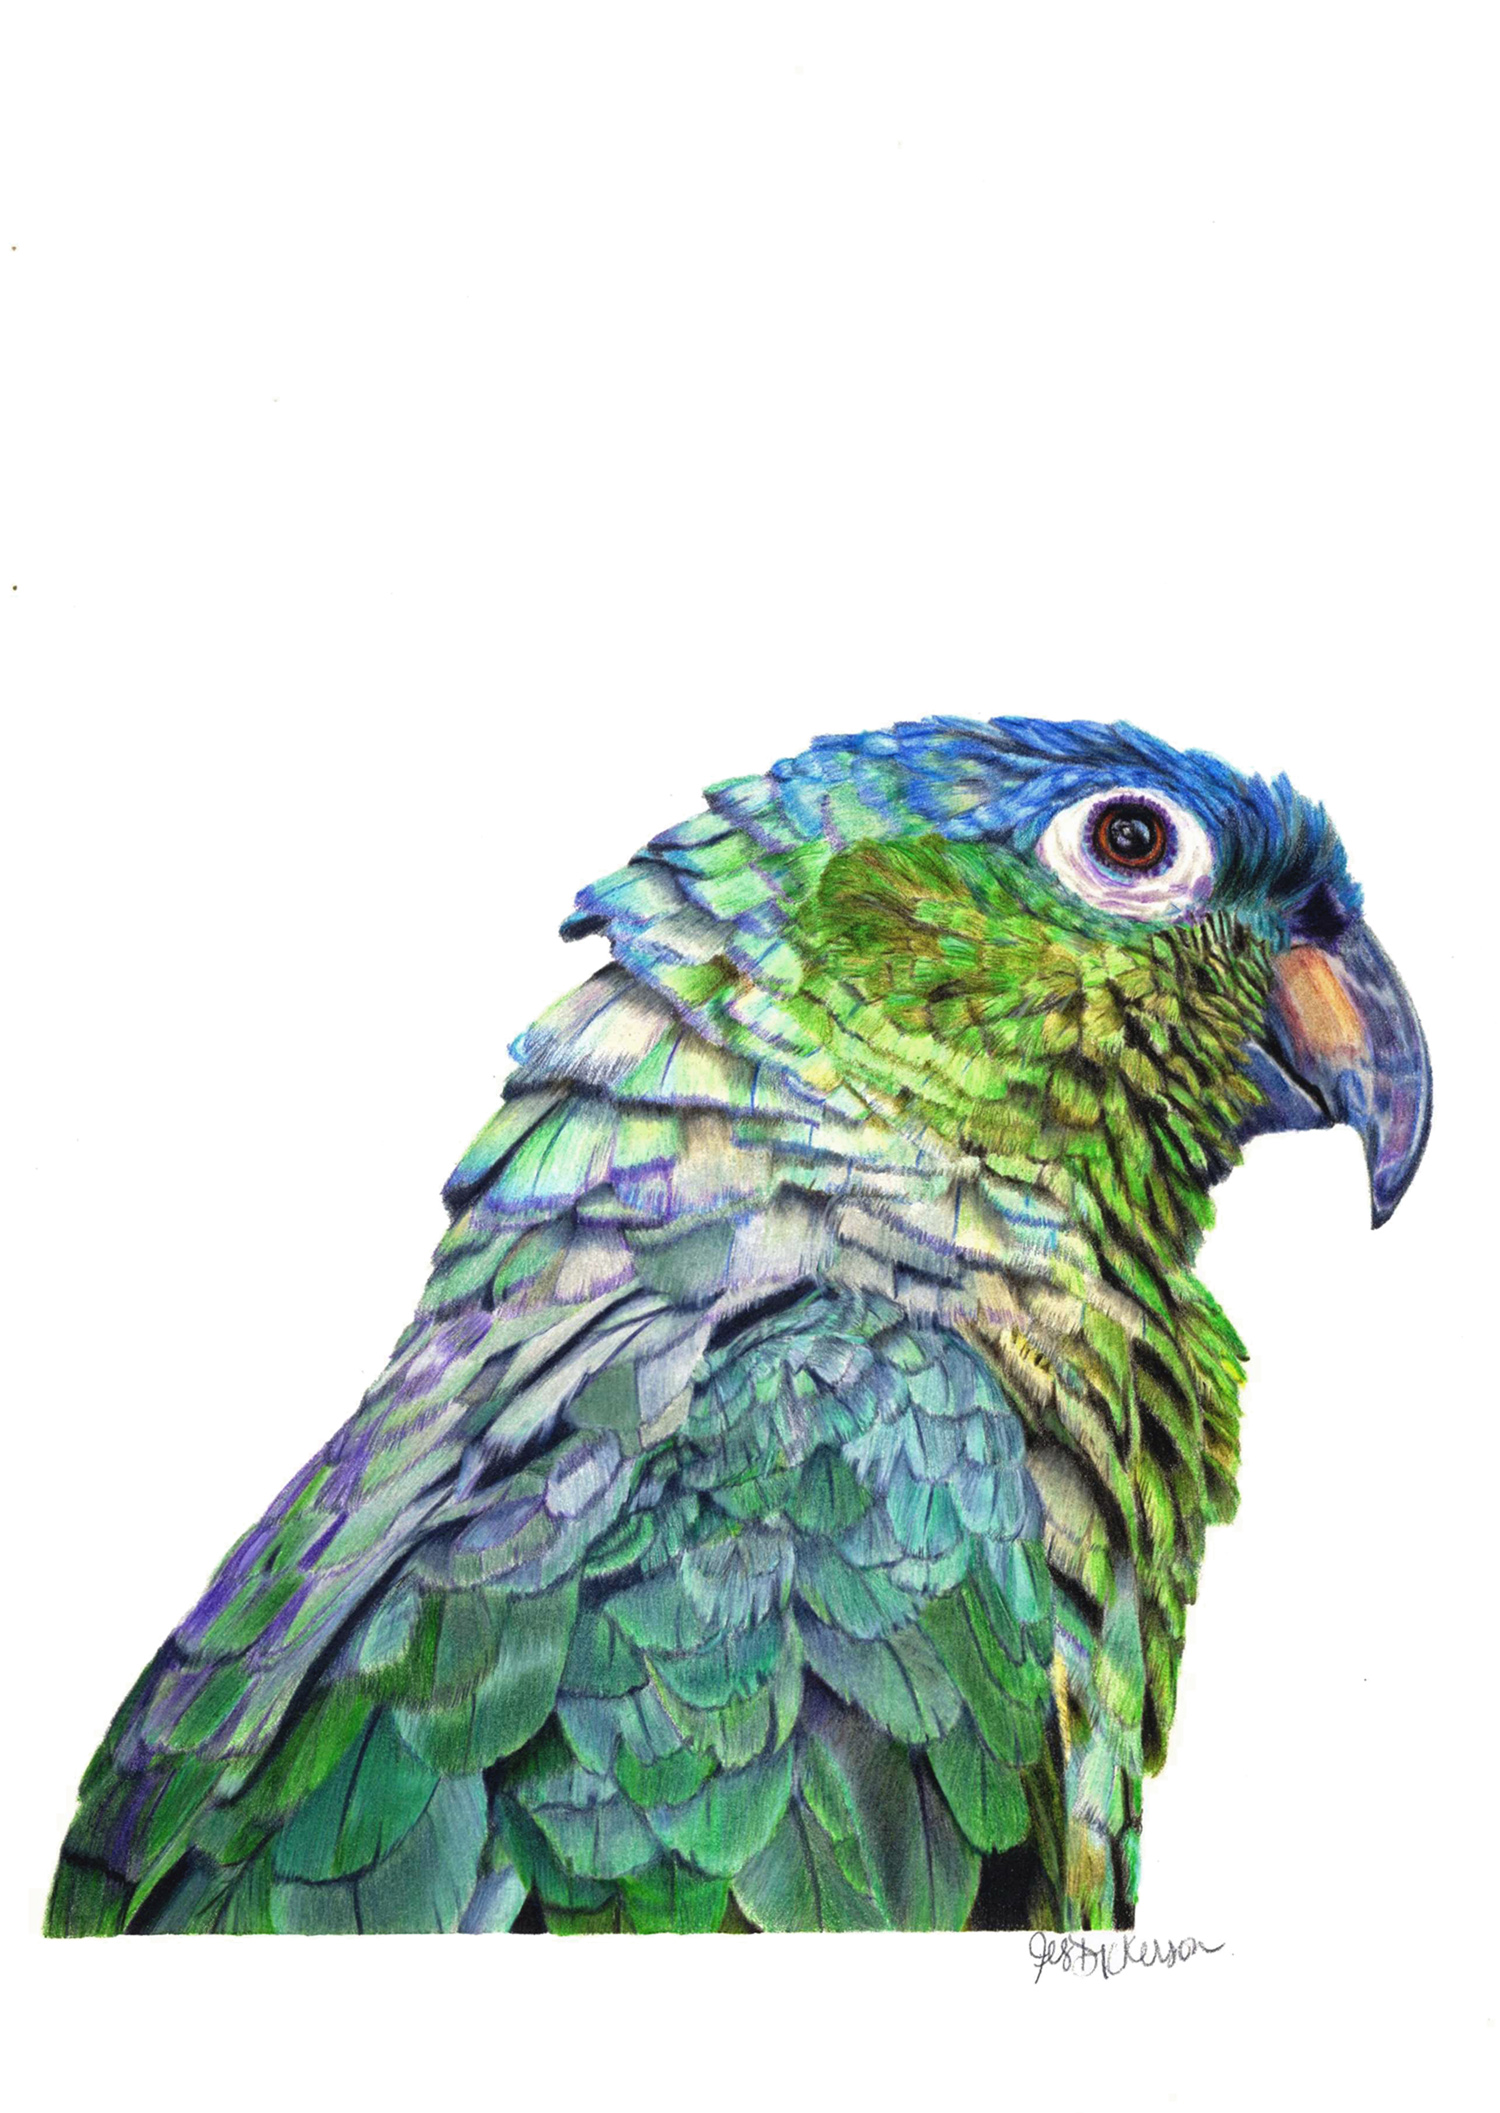 Colored pencil portrait of a mealy parrot